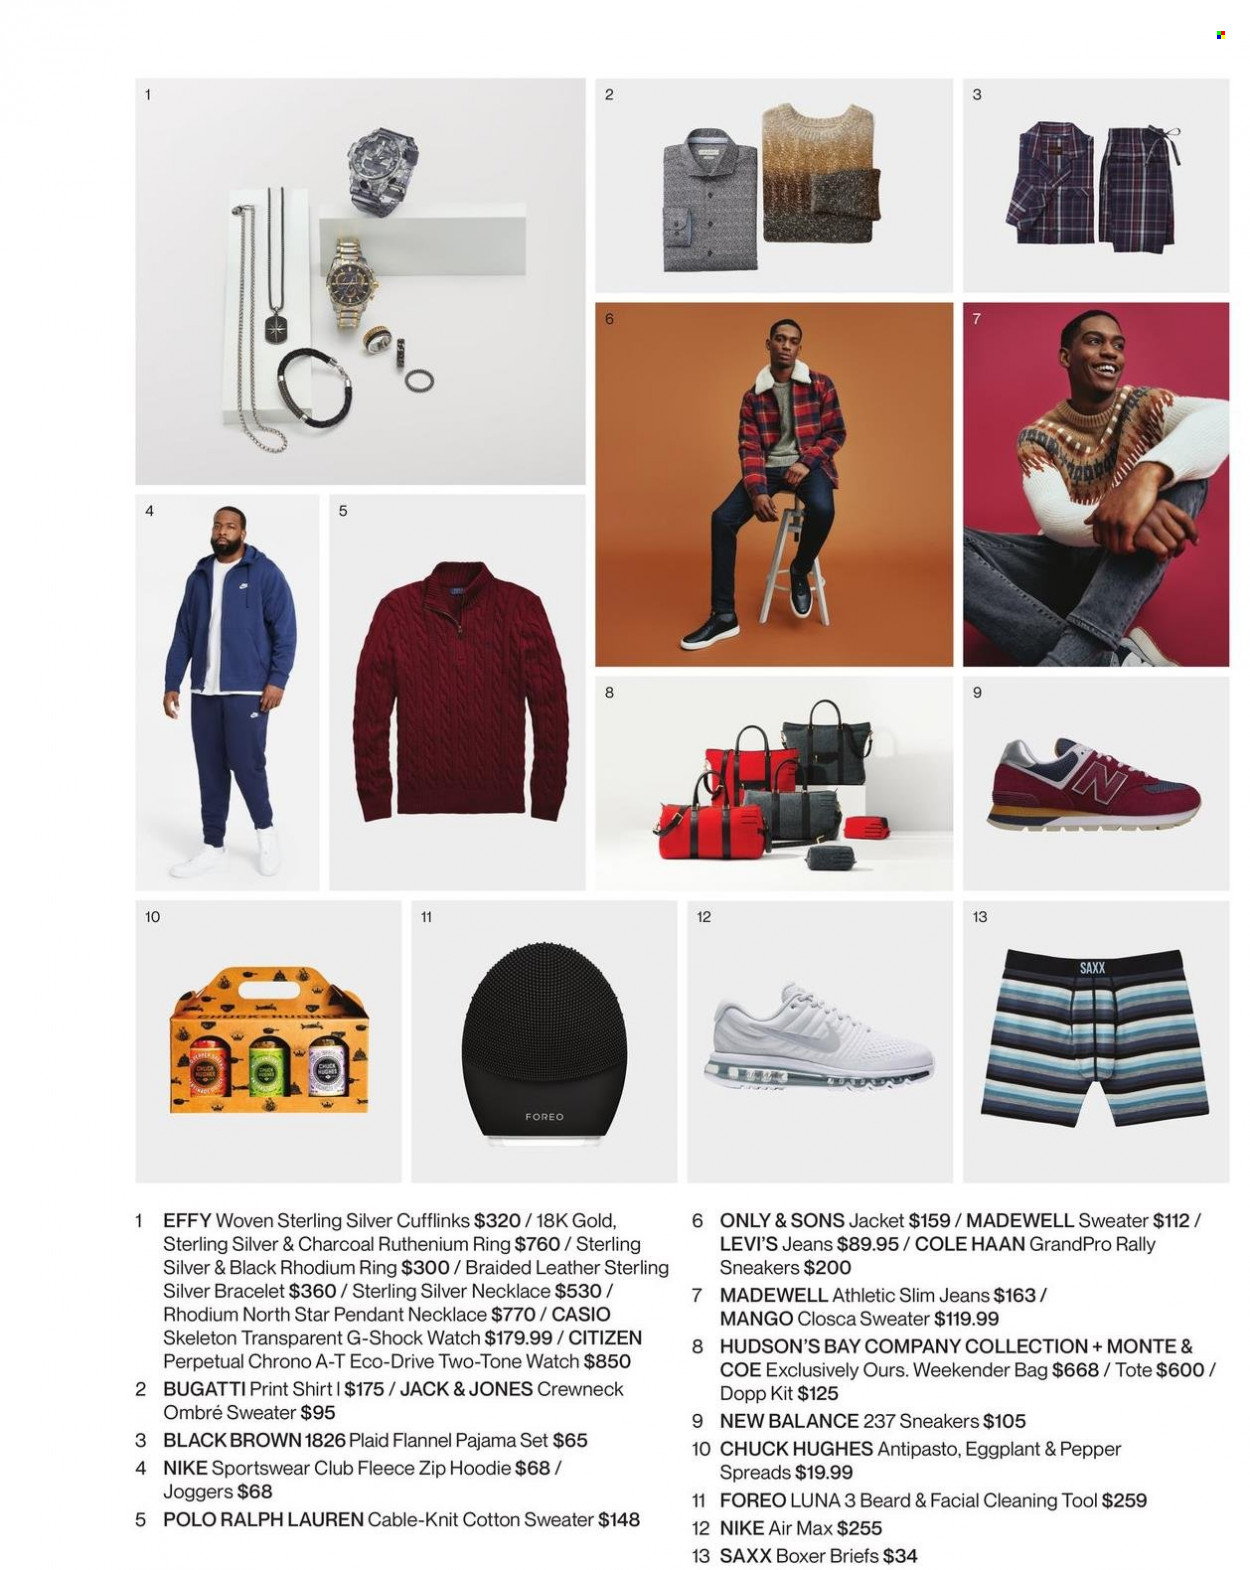 thumbnail - Hudson's Bay Flyer - Sales products - Nike, dopp kit, cleaning tools, bag, deco strips, Casio, tote, jacket, Levi's, sweater, hoodie, joggers, bracelet, necklace, watch, pendant, pajamas, briefs, Saxx, New Balance, sneakers, shirt, jeans. Page 21.